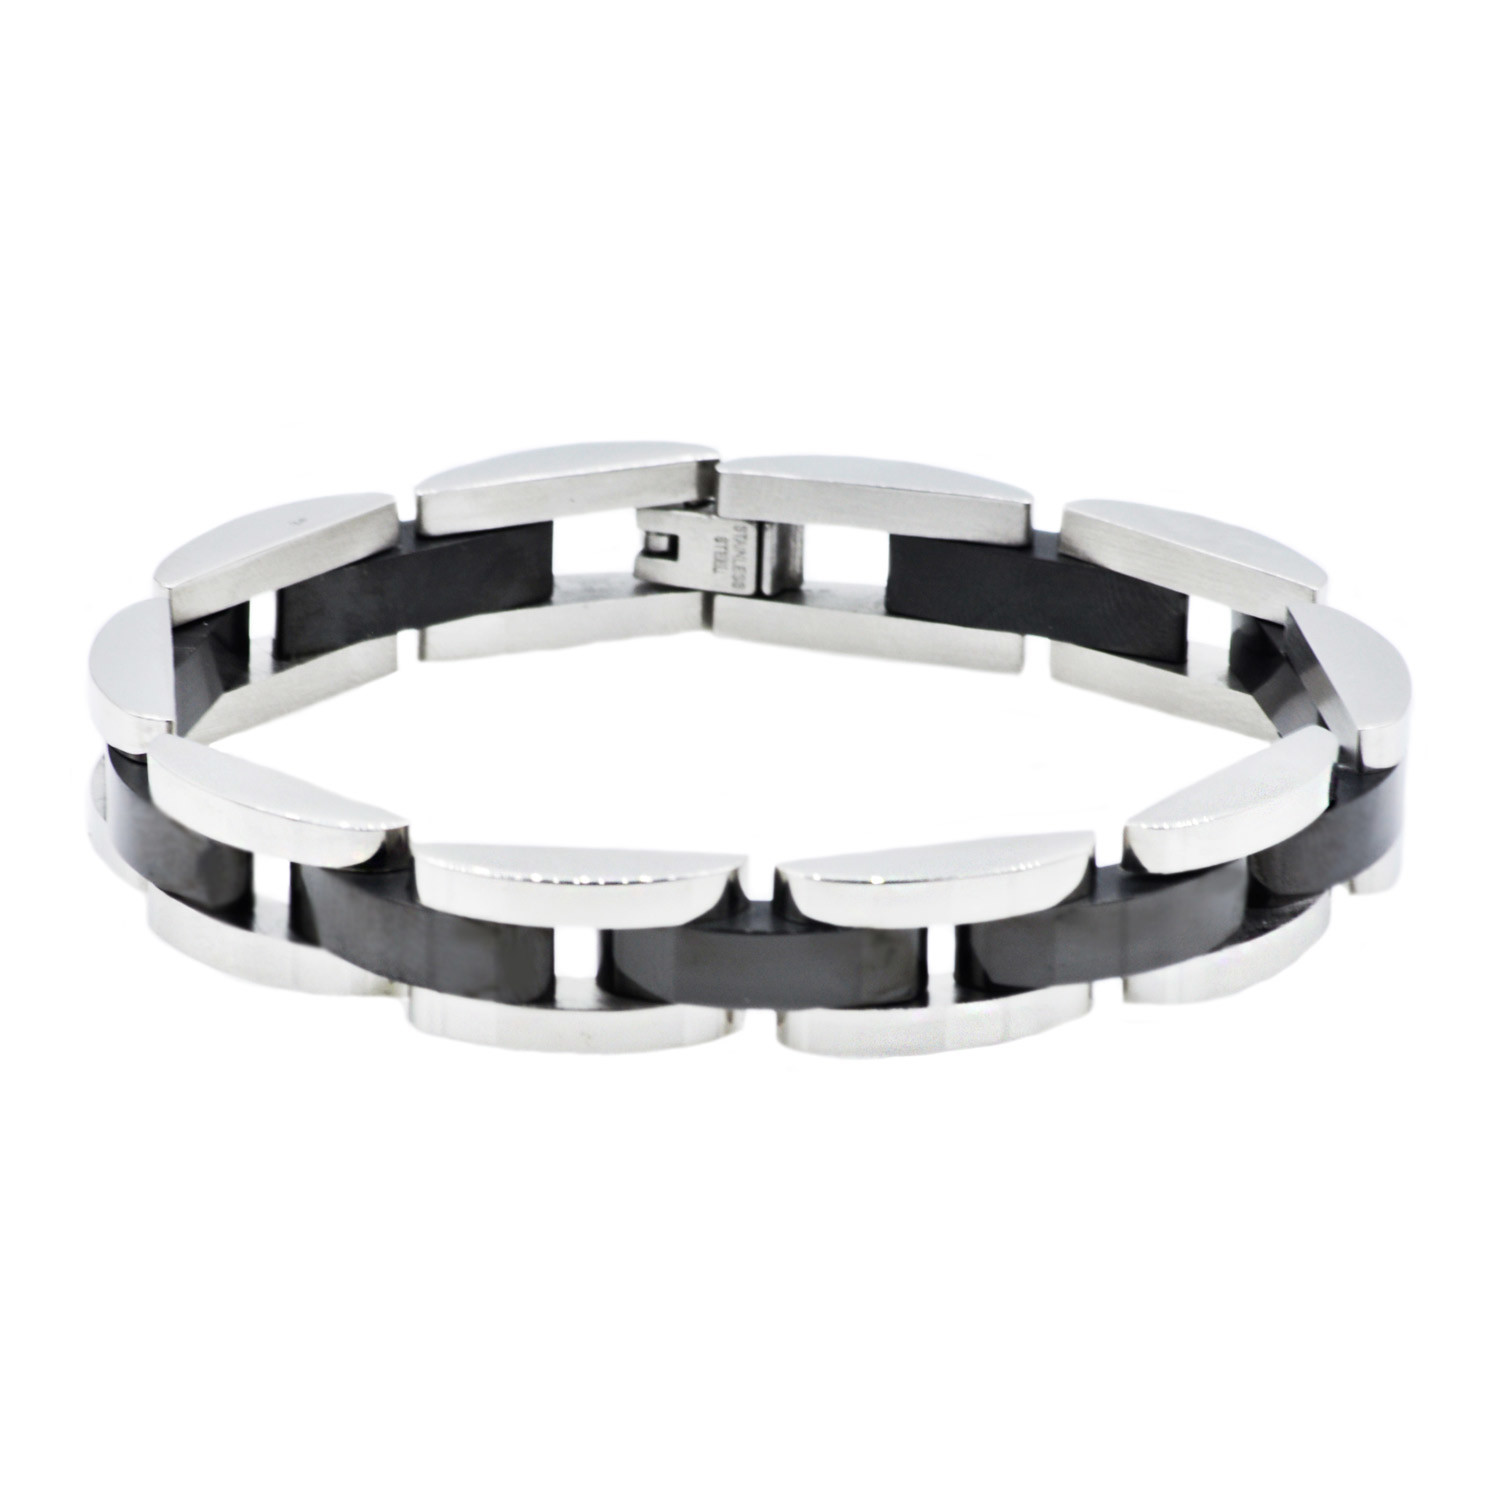 Polished Stainless Steel Semi Circle Link Bracelet (Chocolate + Silver ...